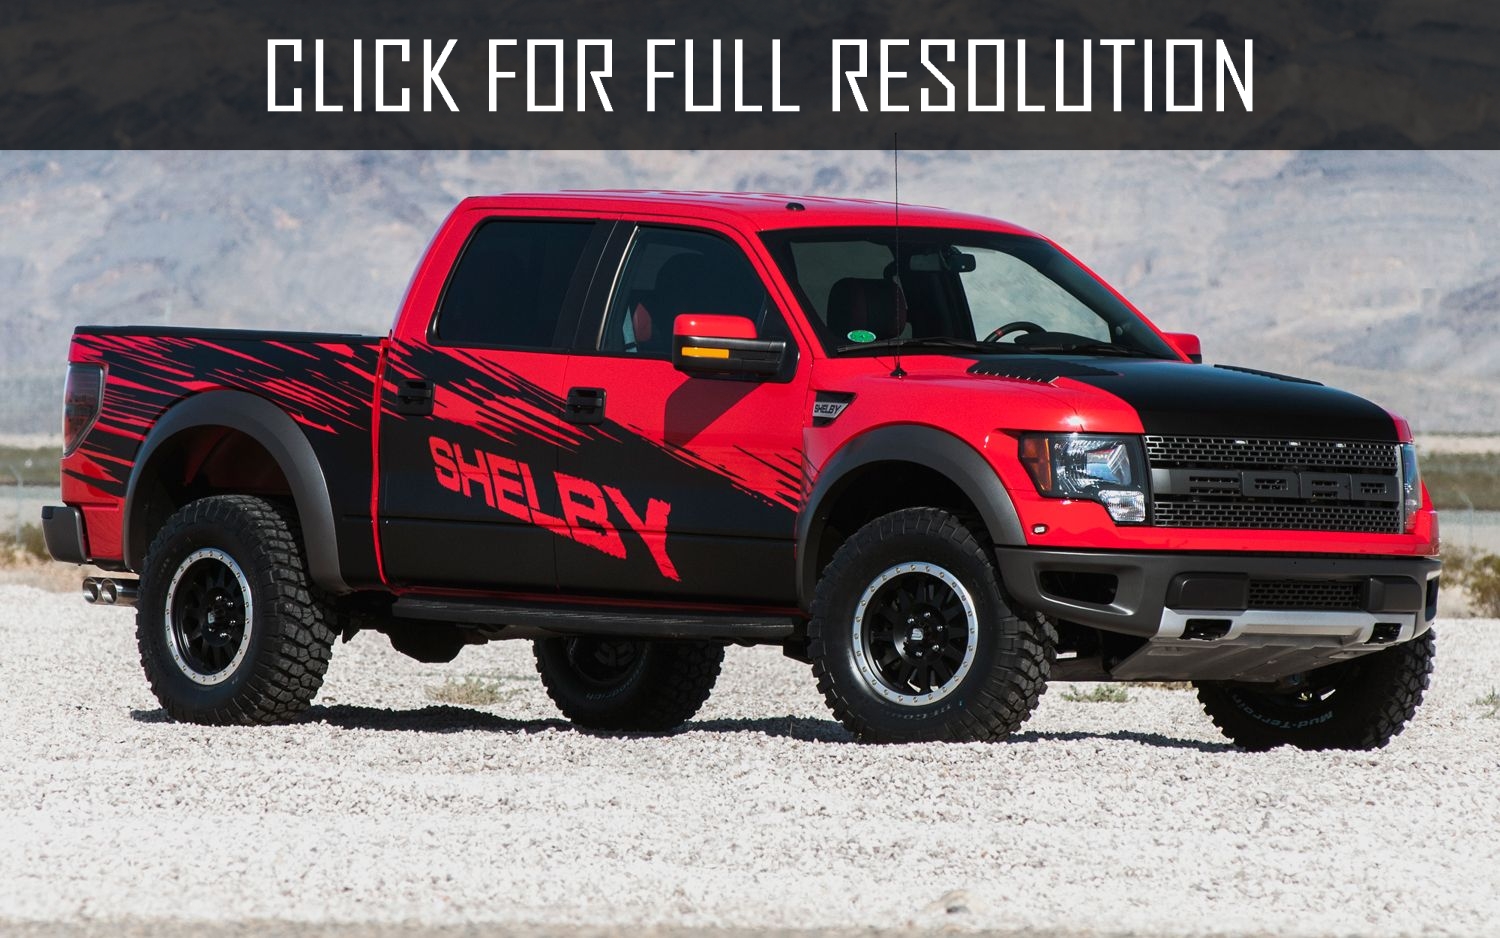 Ford Shelby Raptor